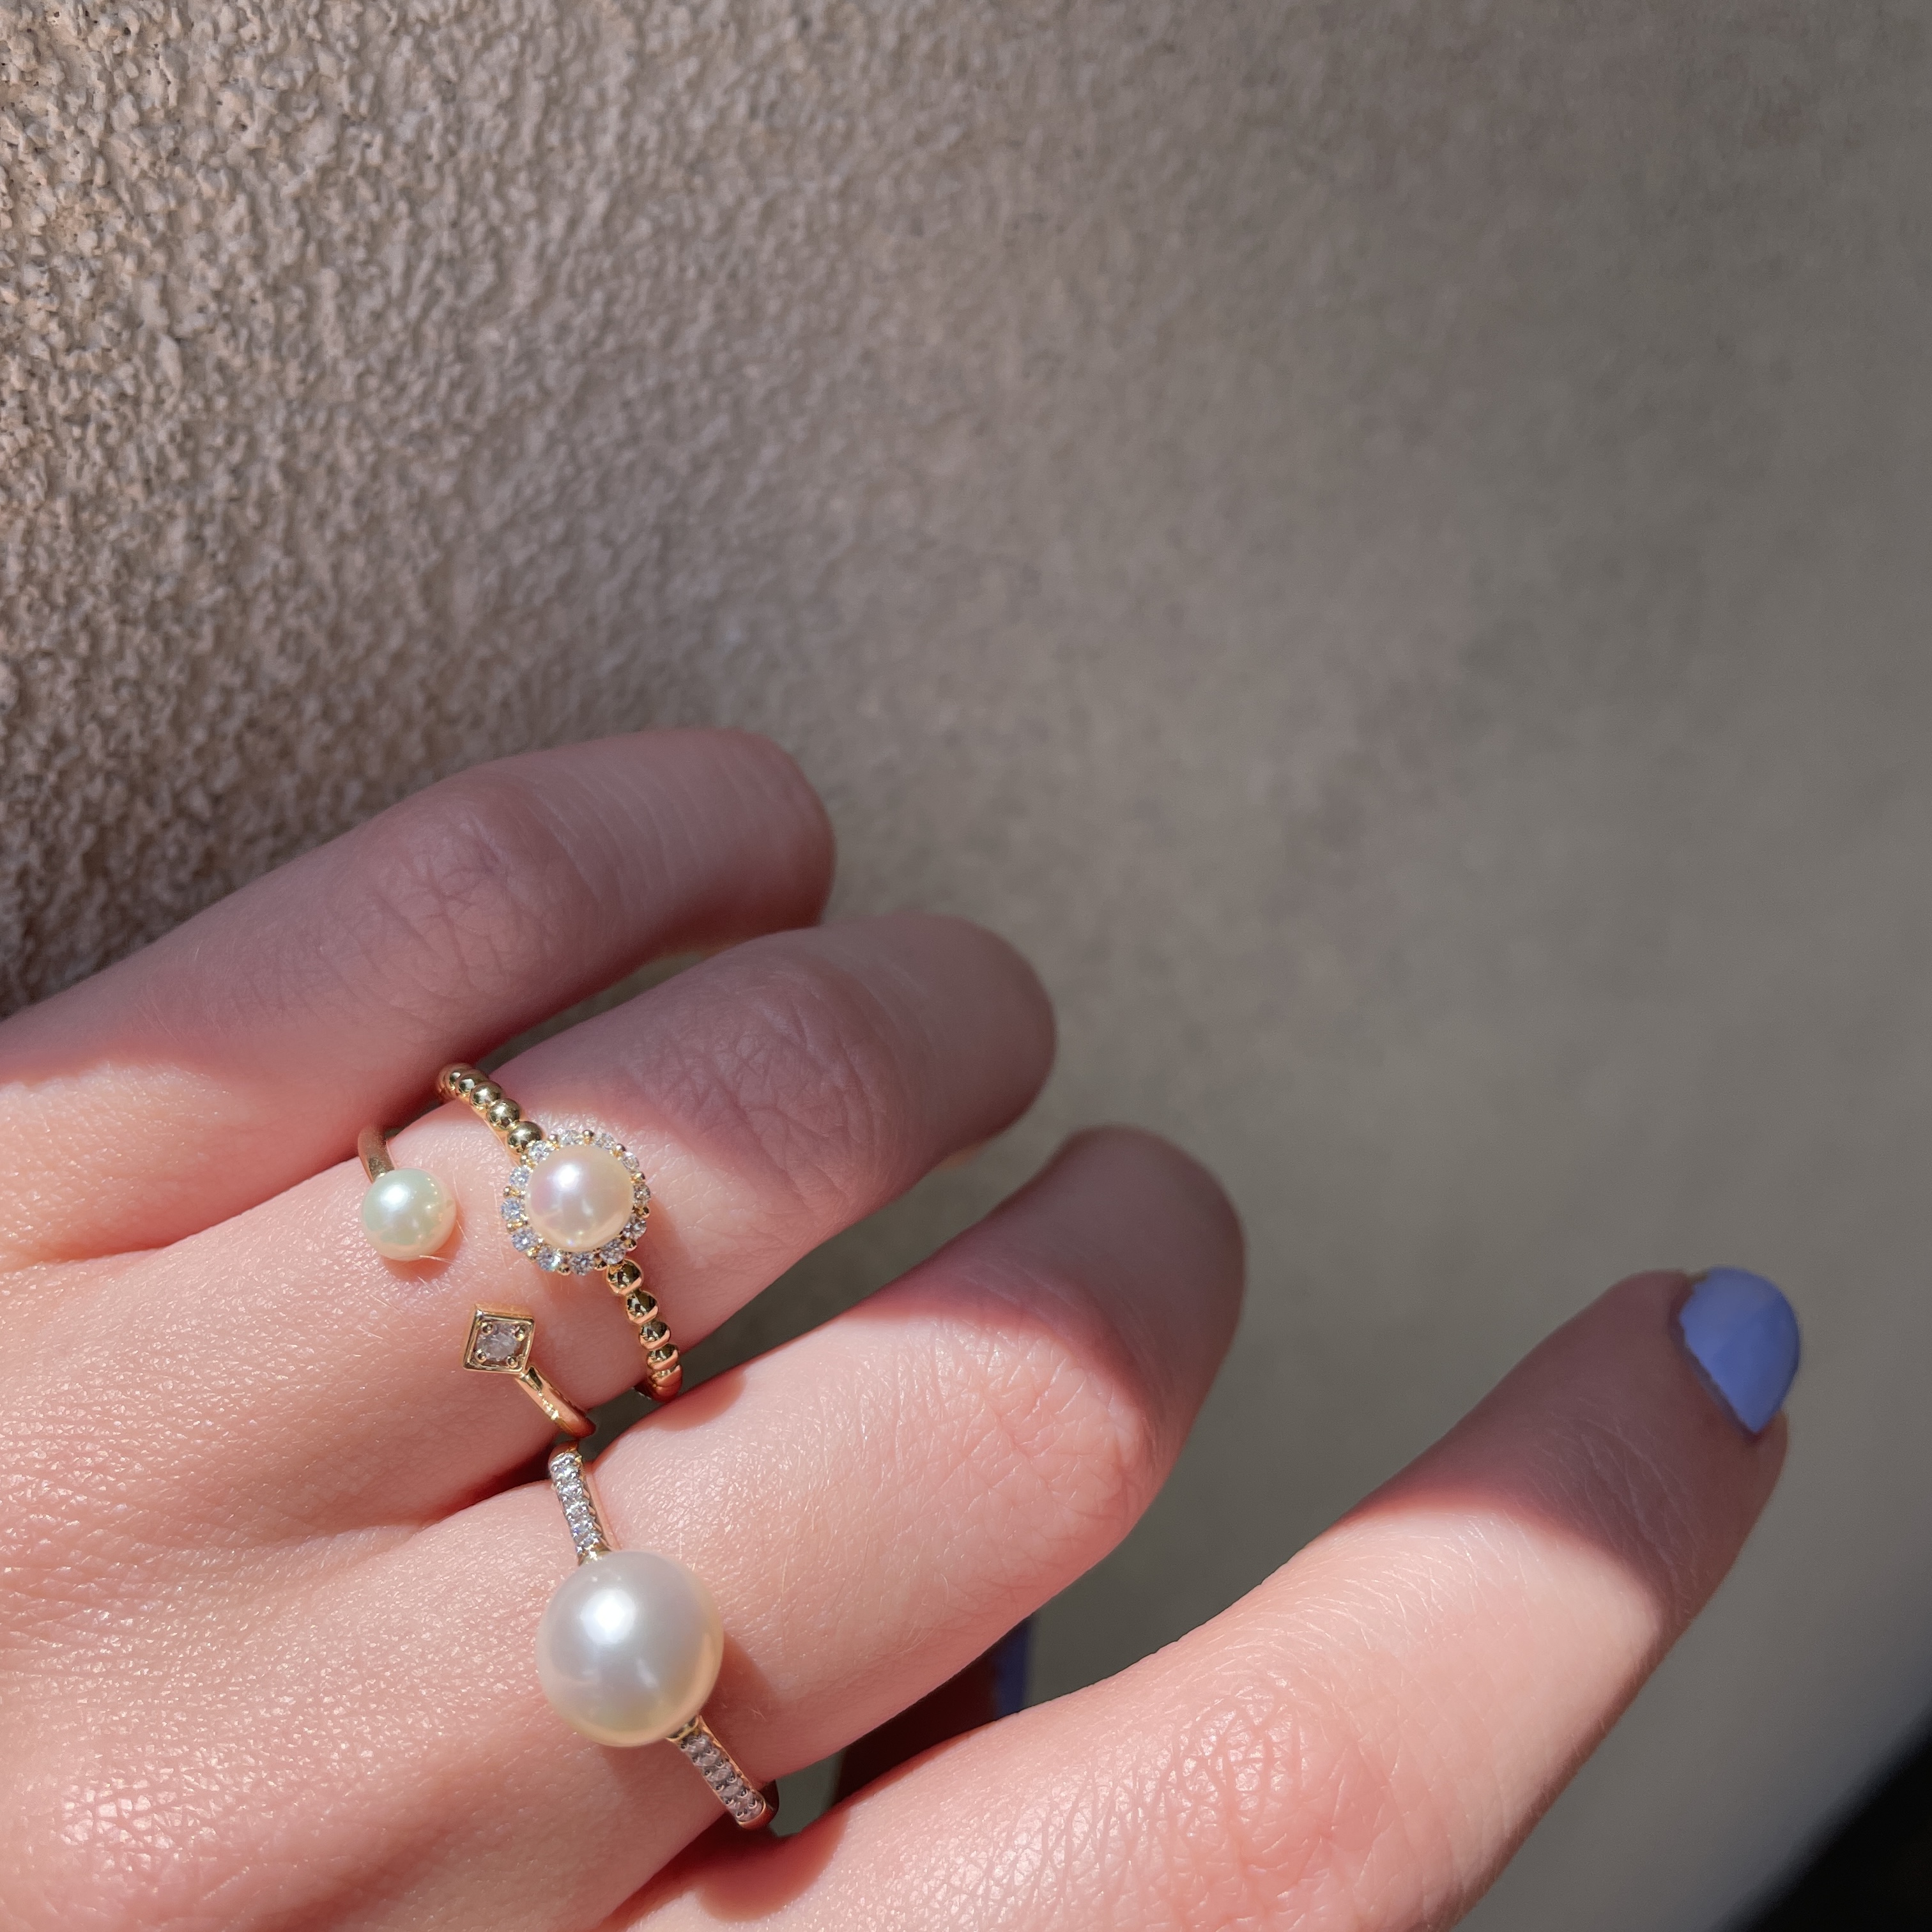 Yellow Gold Halo Pearl Ring